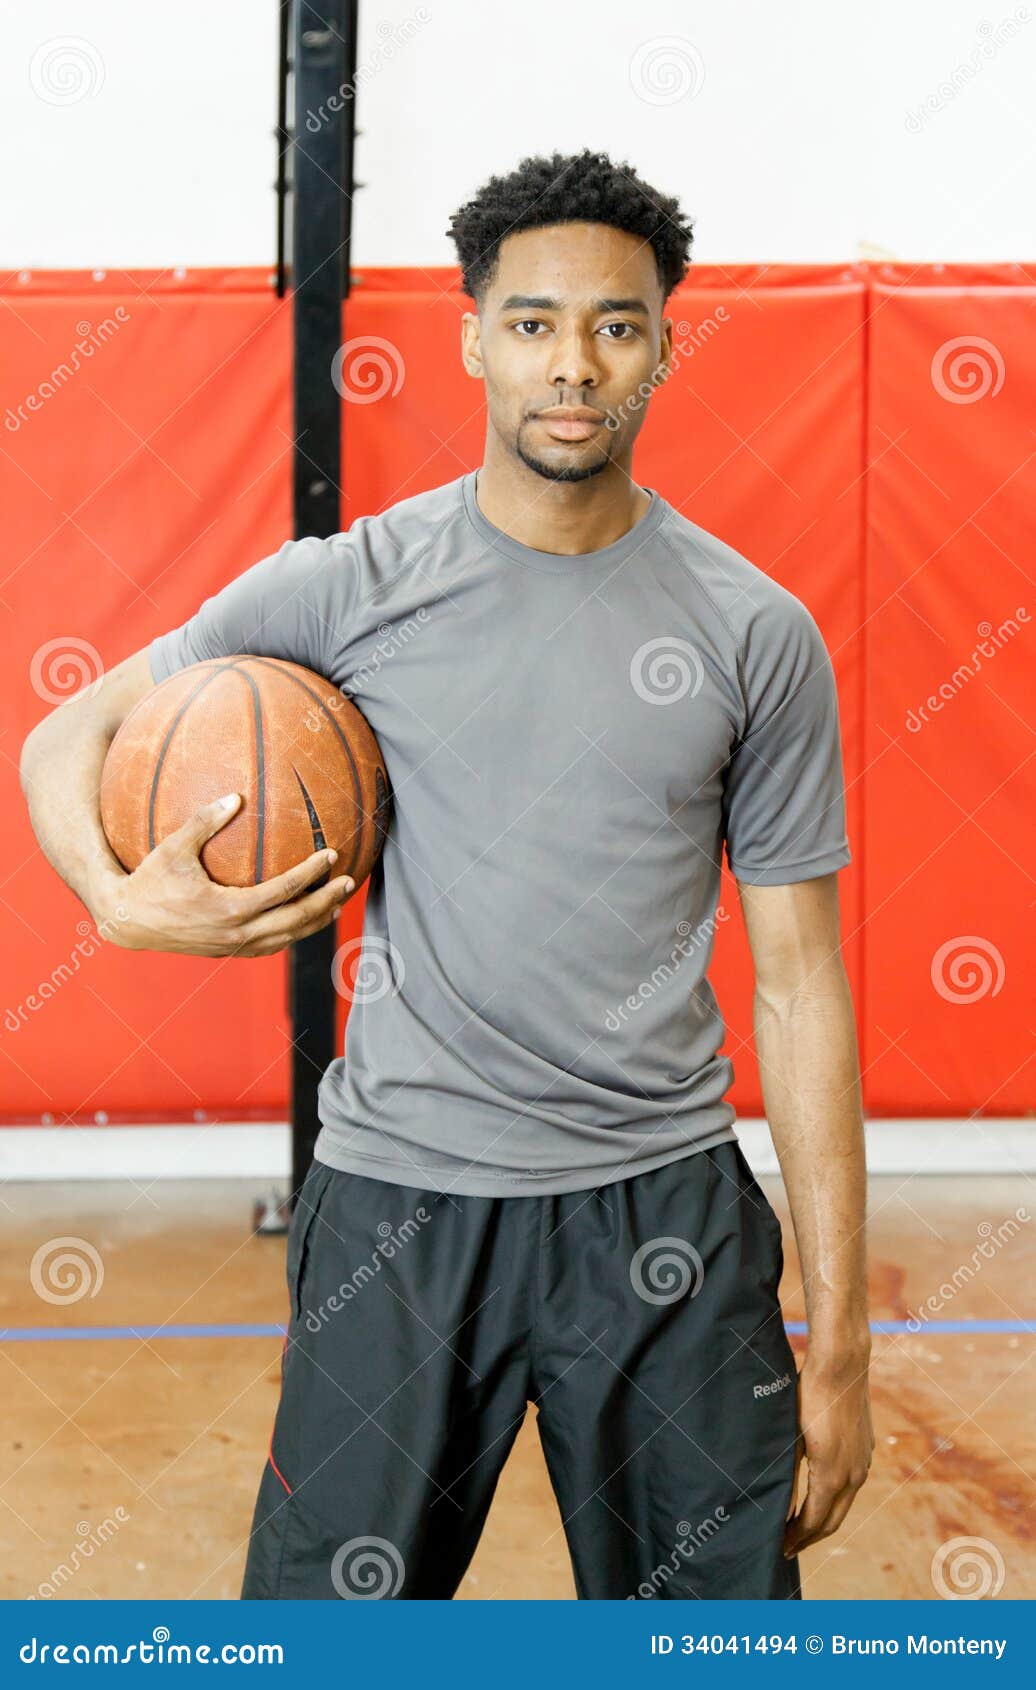 American Teen From Basketball Player 116